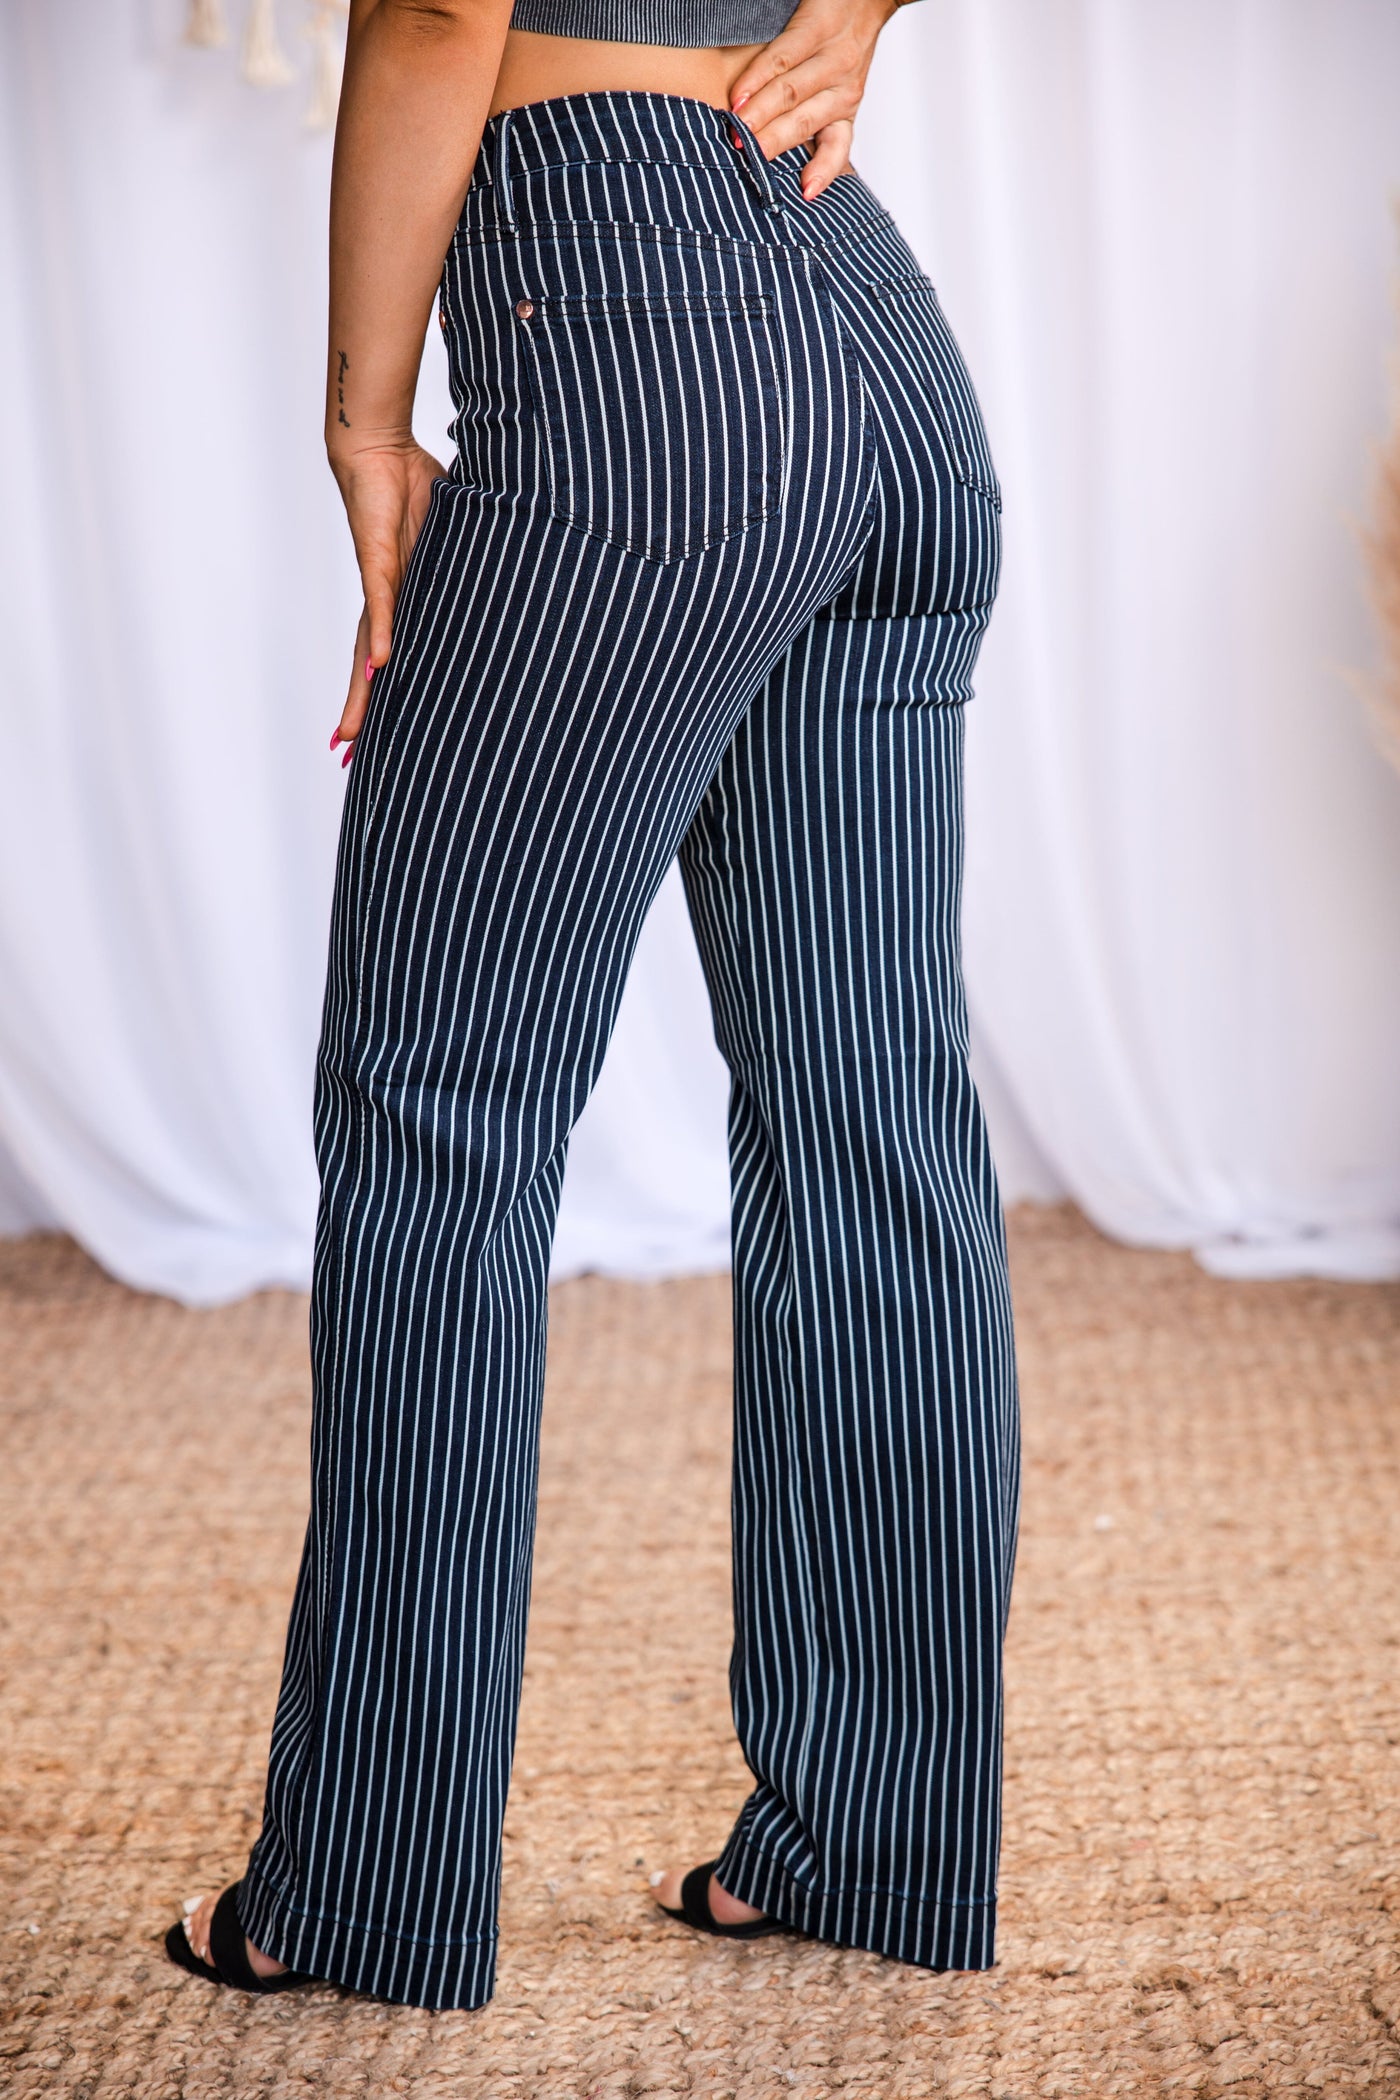 Pinstriped Diva - Tummy Control Judy Blues Giftmas JB Boutique Simplified 